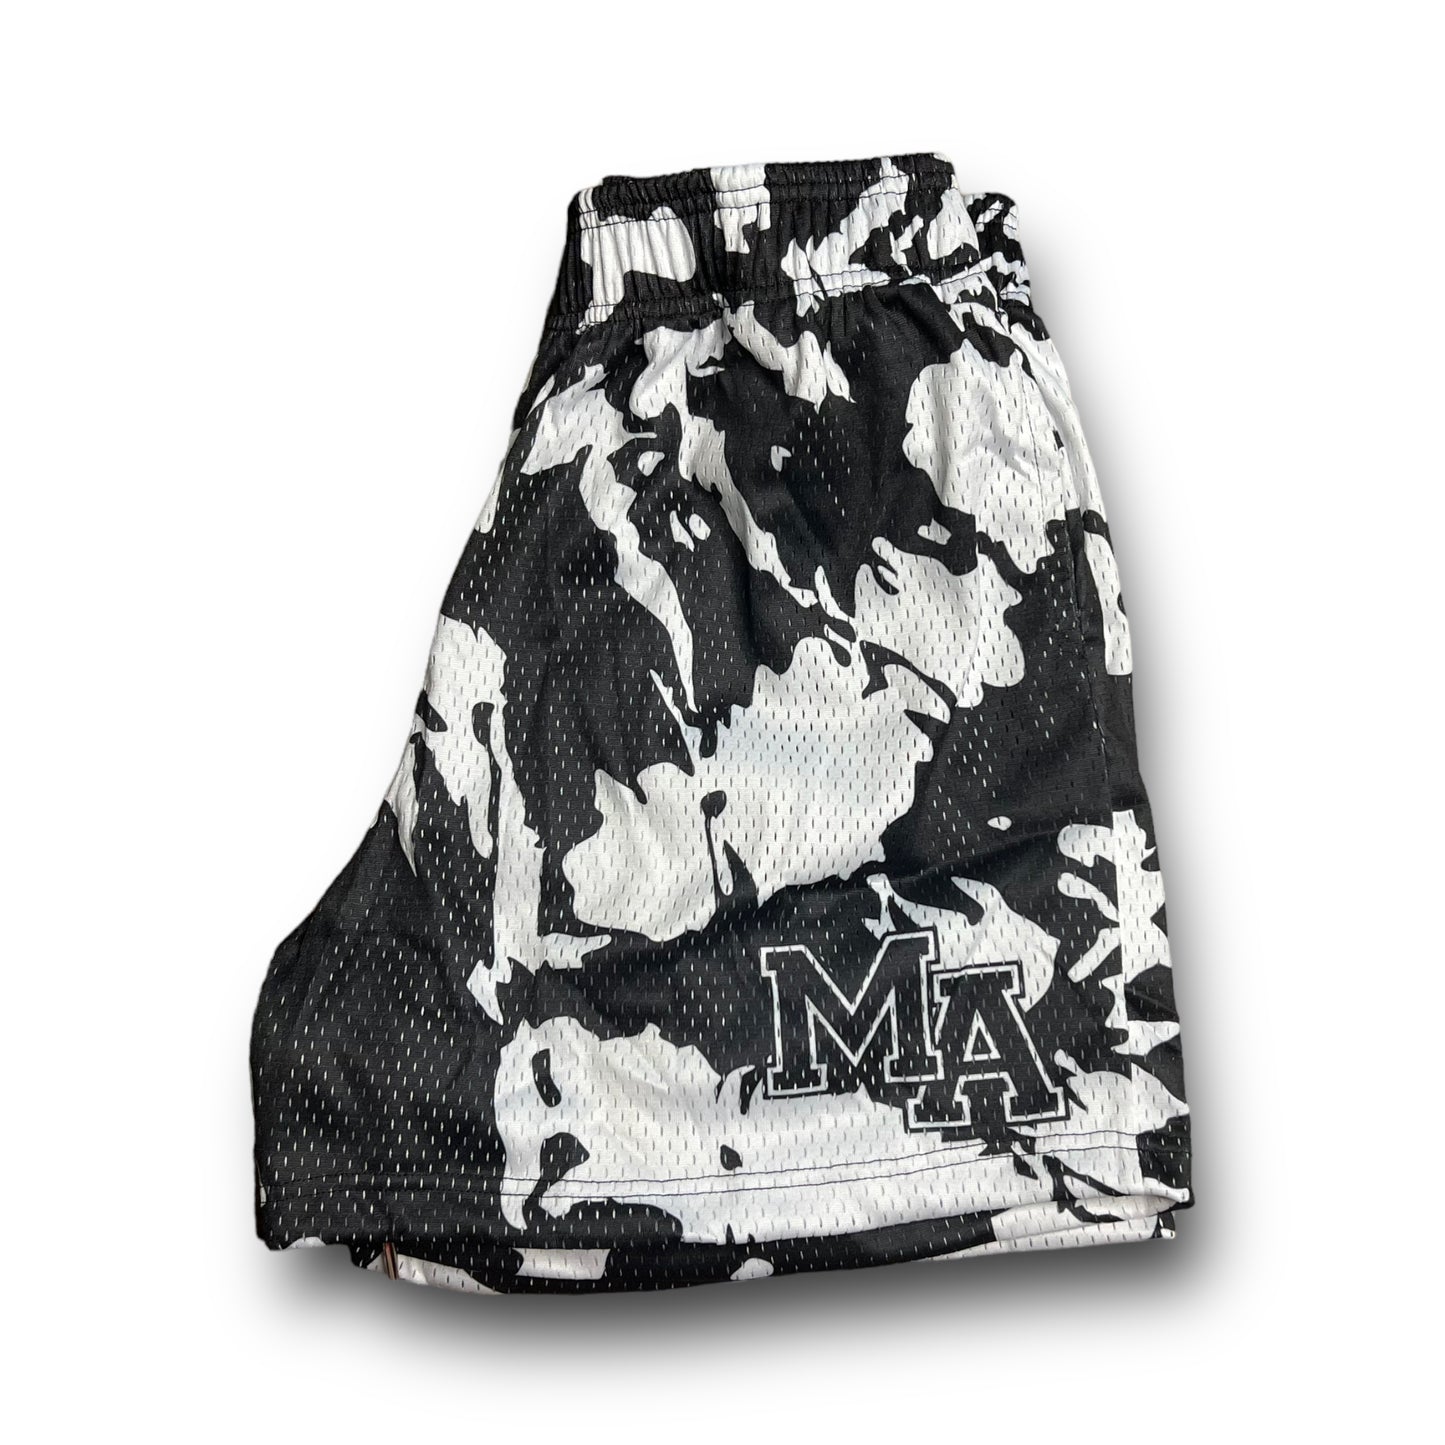 Misfitted Apparel Shorts - Cow Print